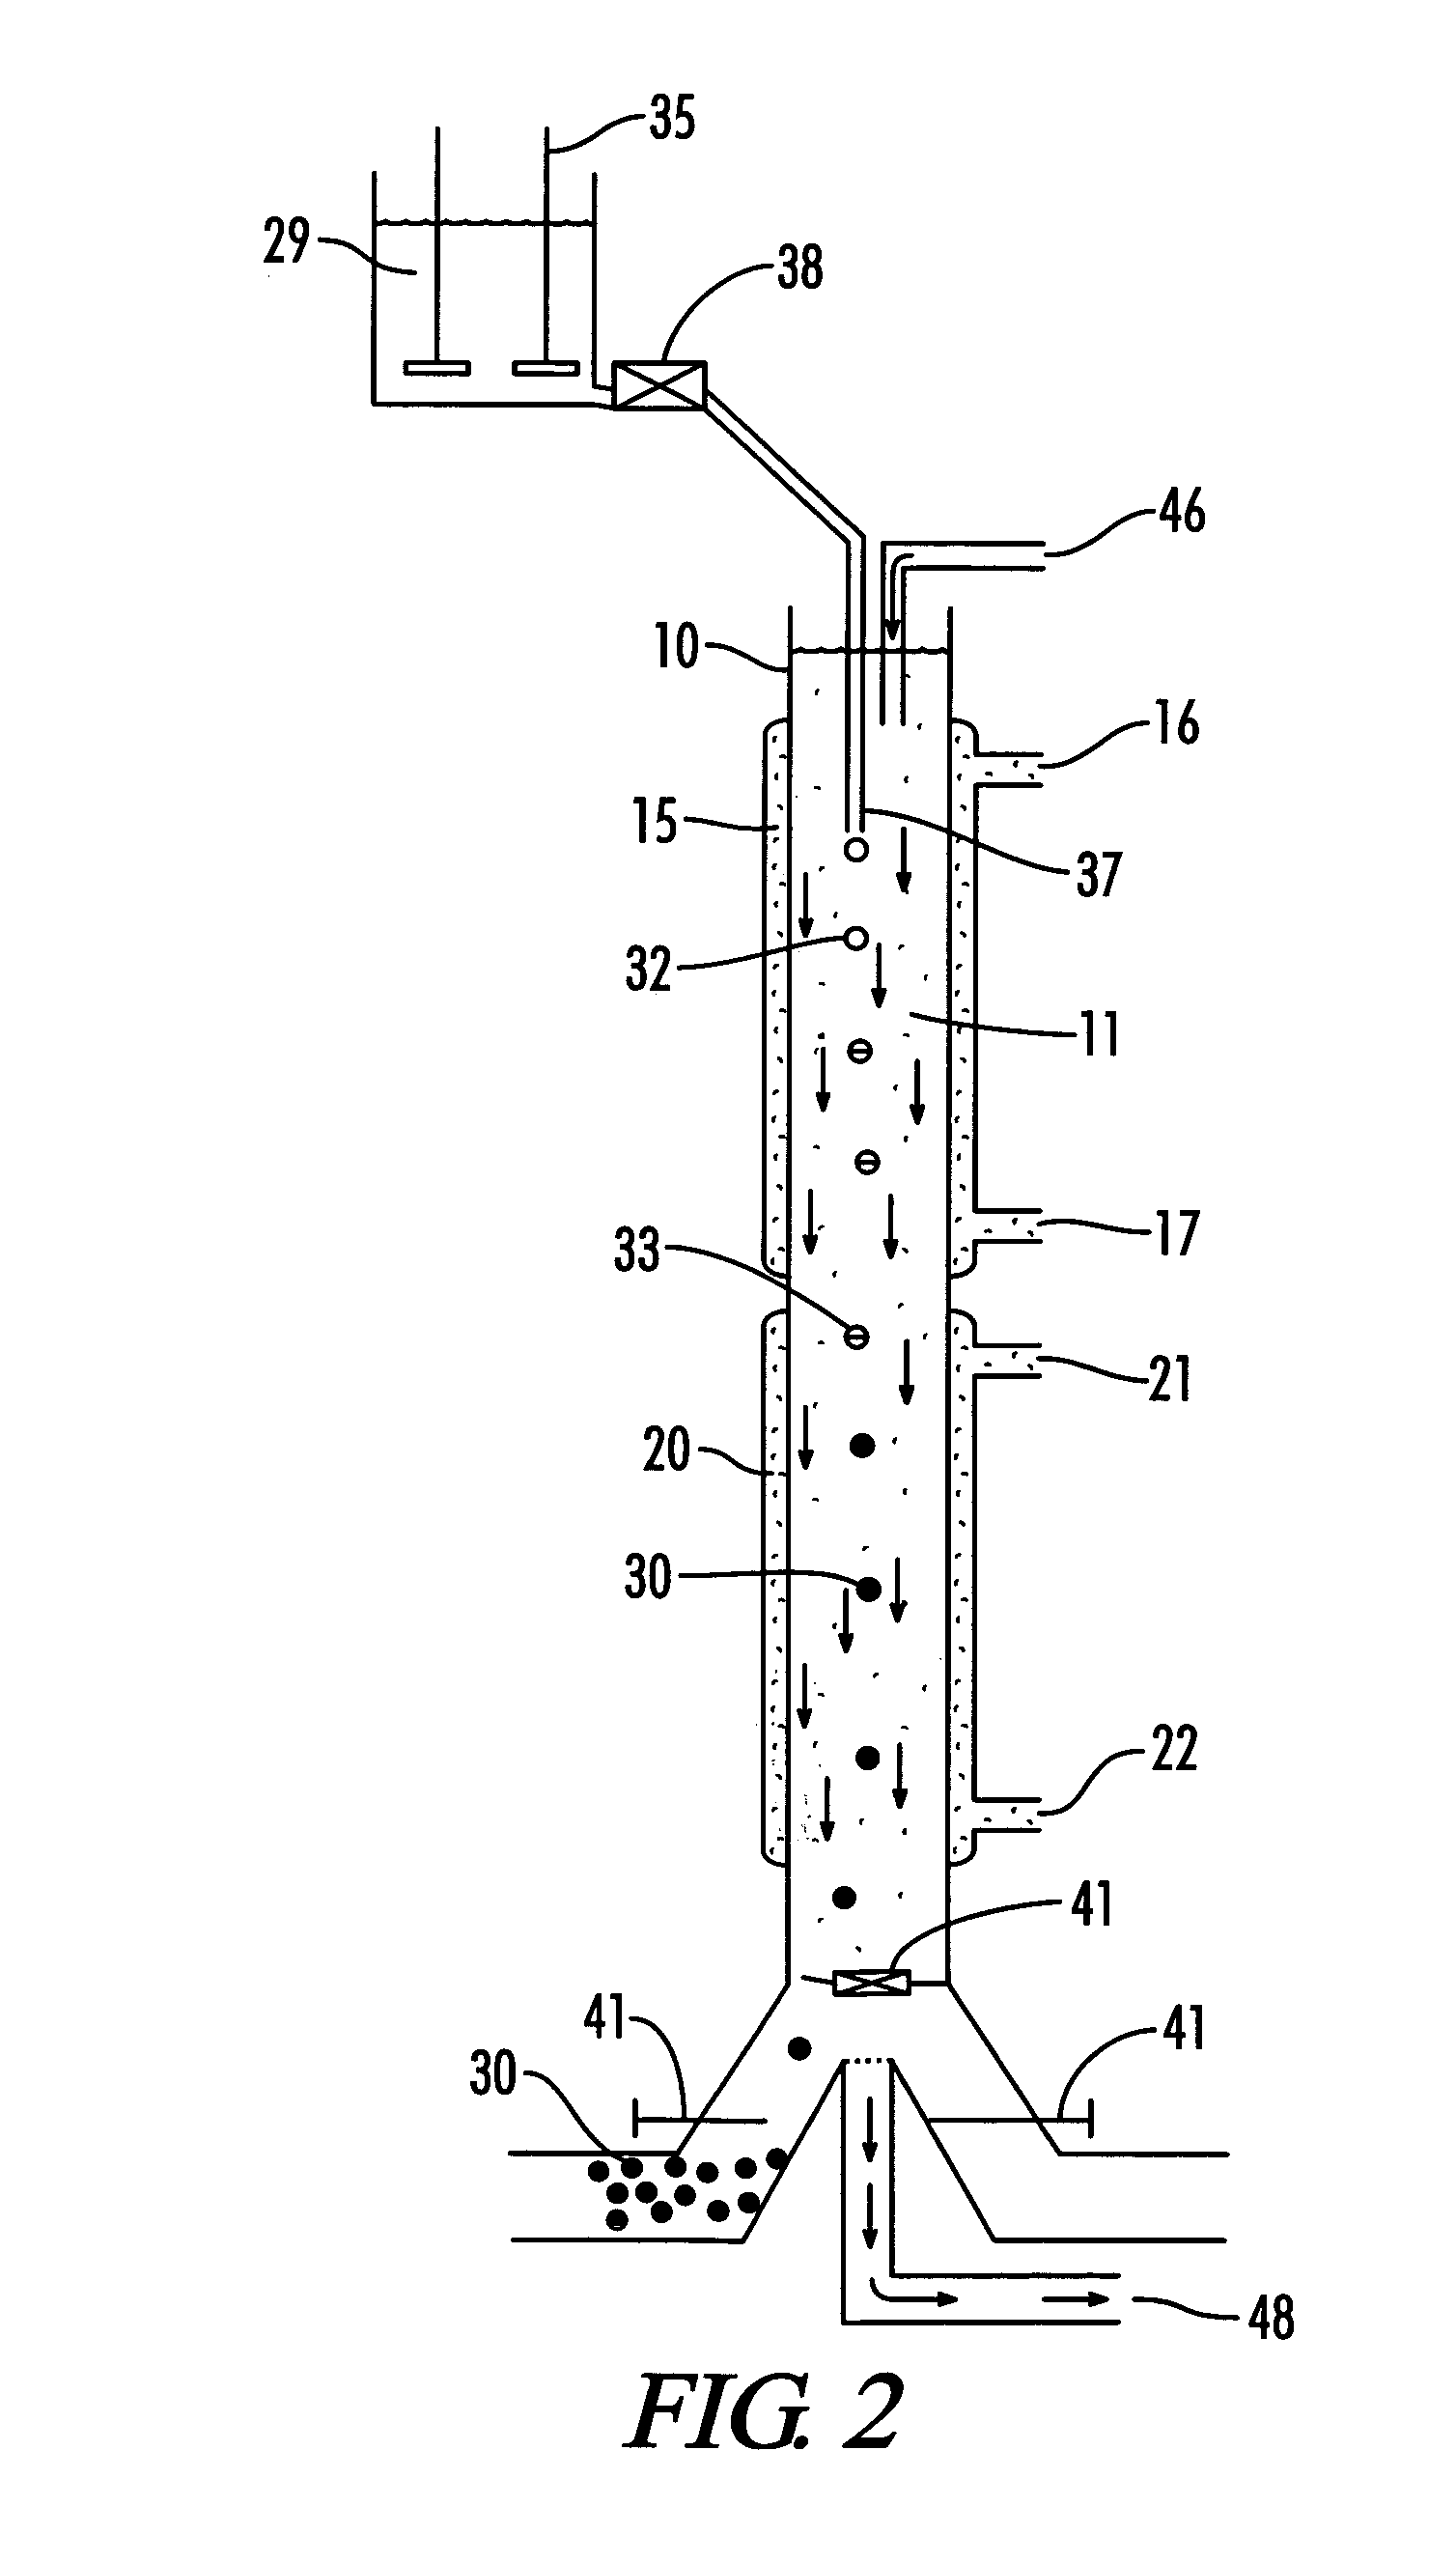 Process and apparatus for producing spherical pellets using molten solid matrices